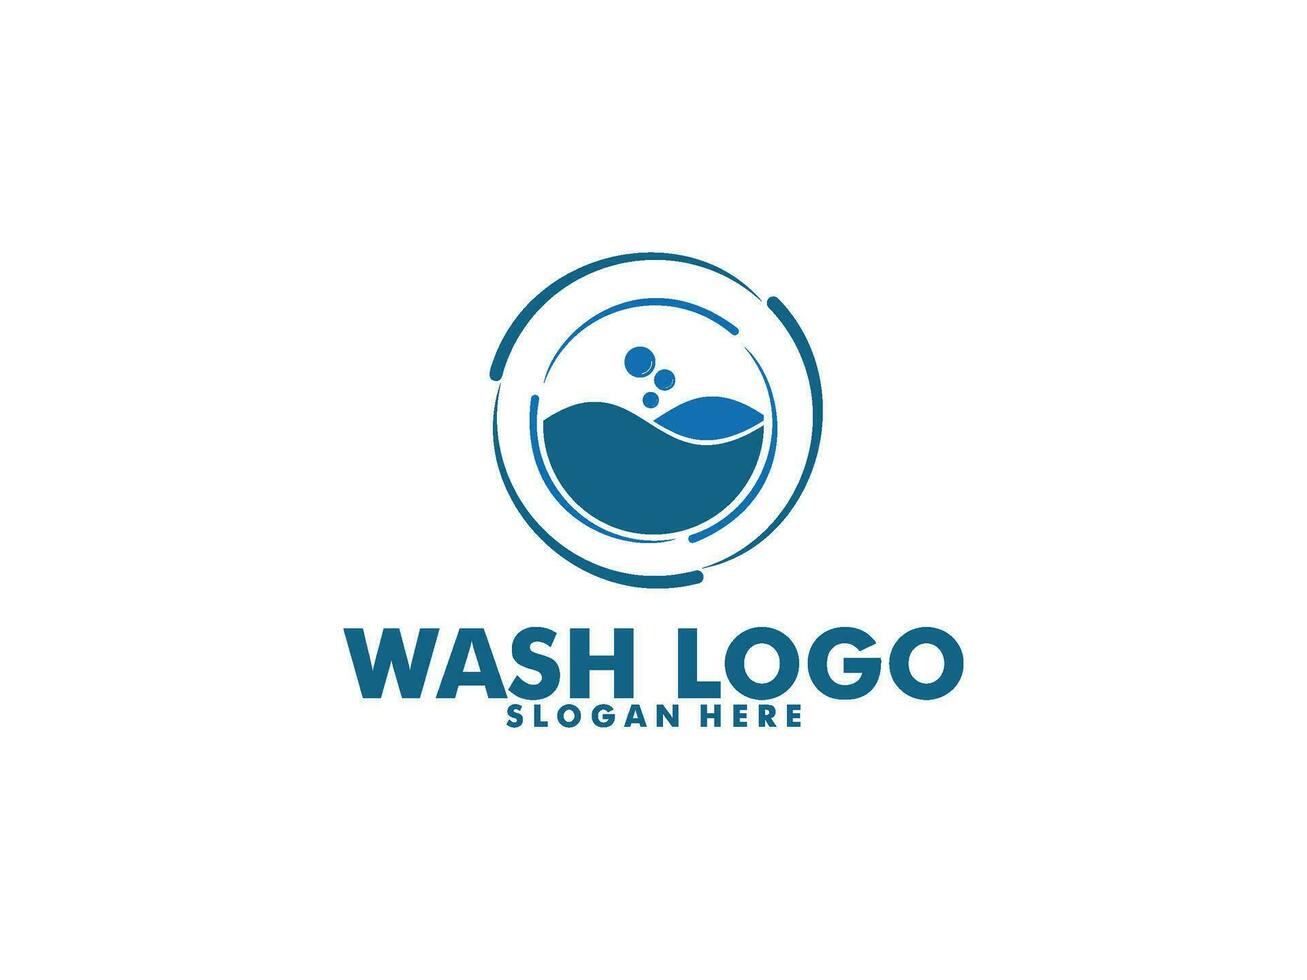 laundry icon washing machine logo design for business clothes wash cleans modern template vector